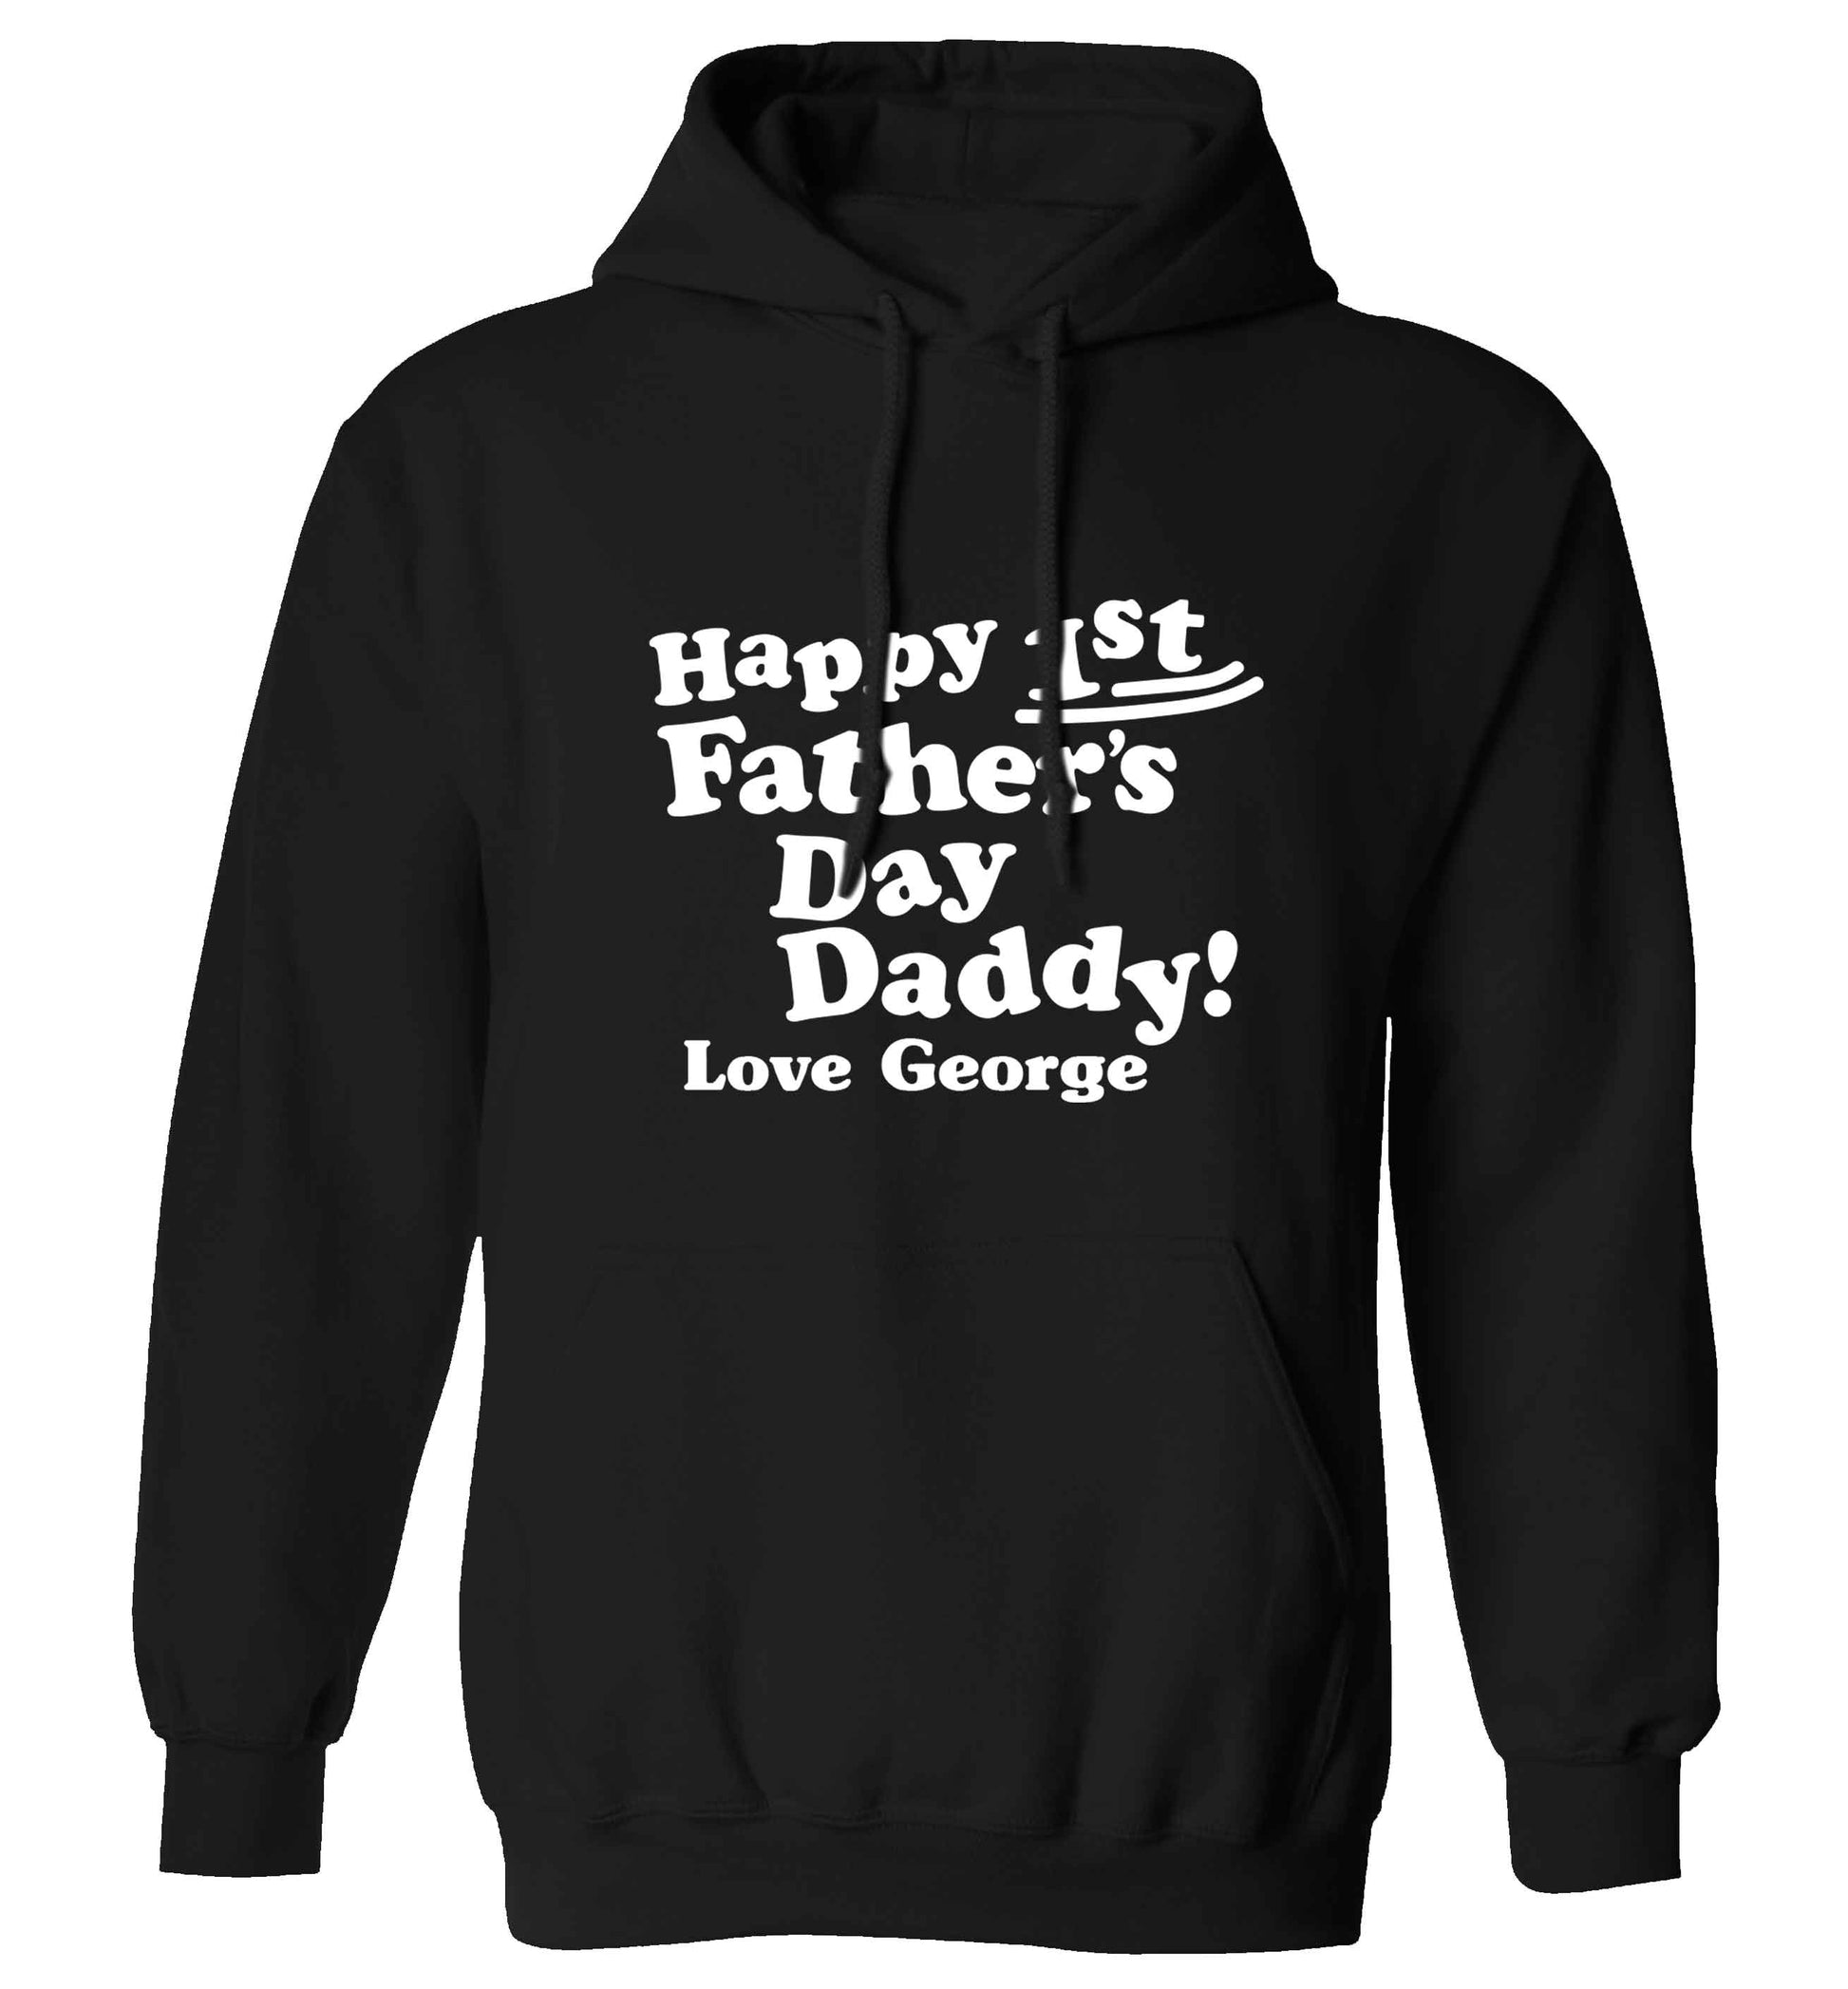 Personalised Happy first father's day daddy  adults unisex black hoodie 2XL